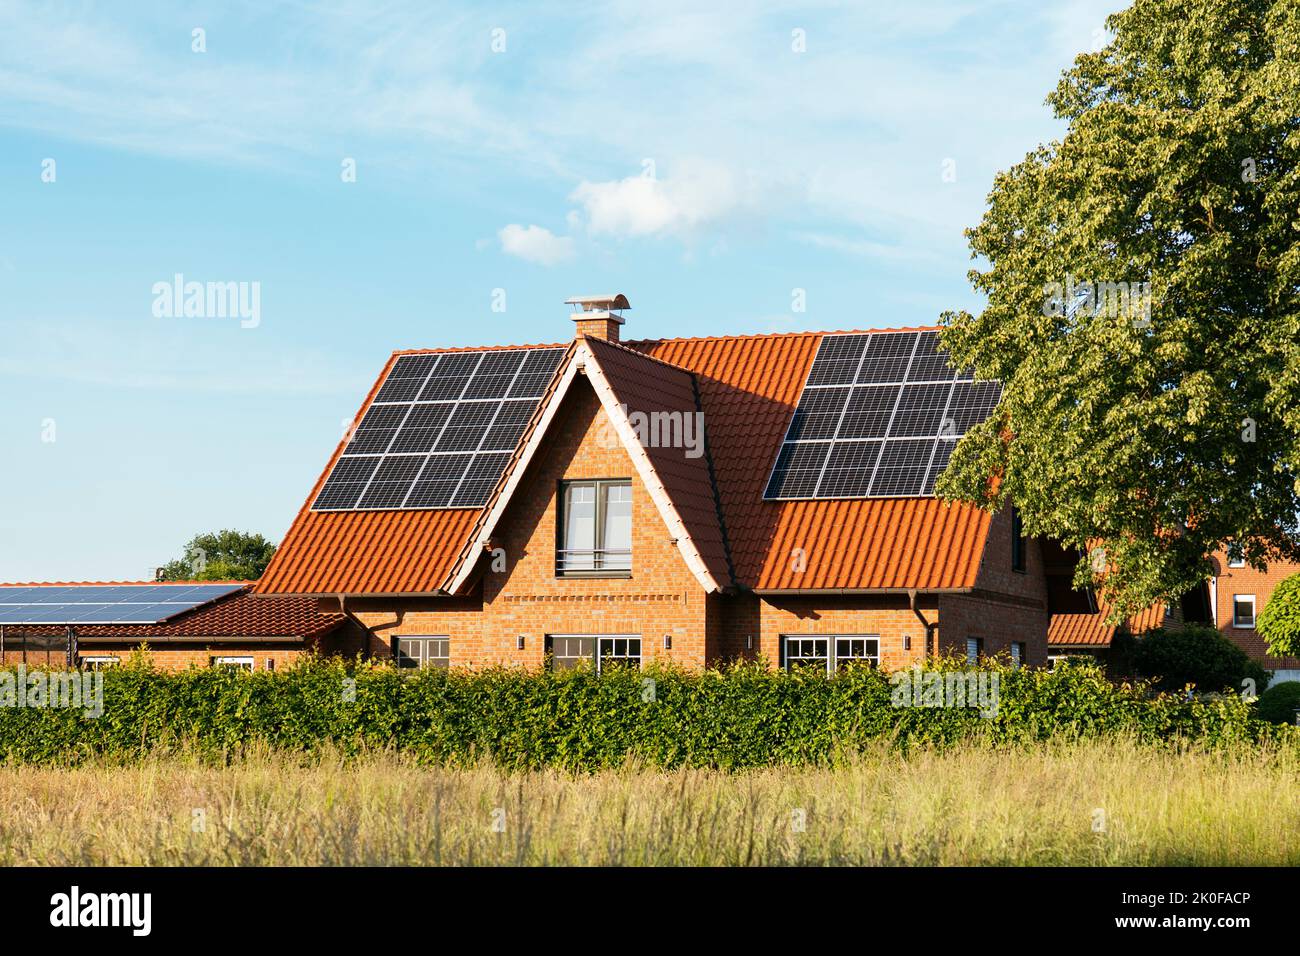 Detached house with solar panels on the roof in Petershagen, Germany. Stock Photo